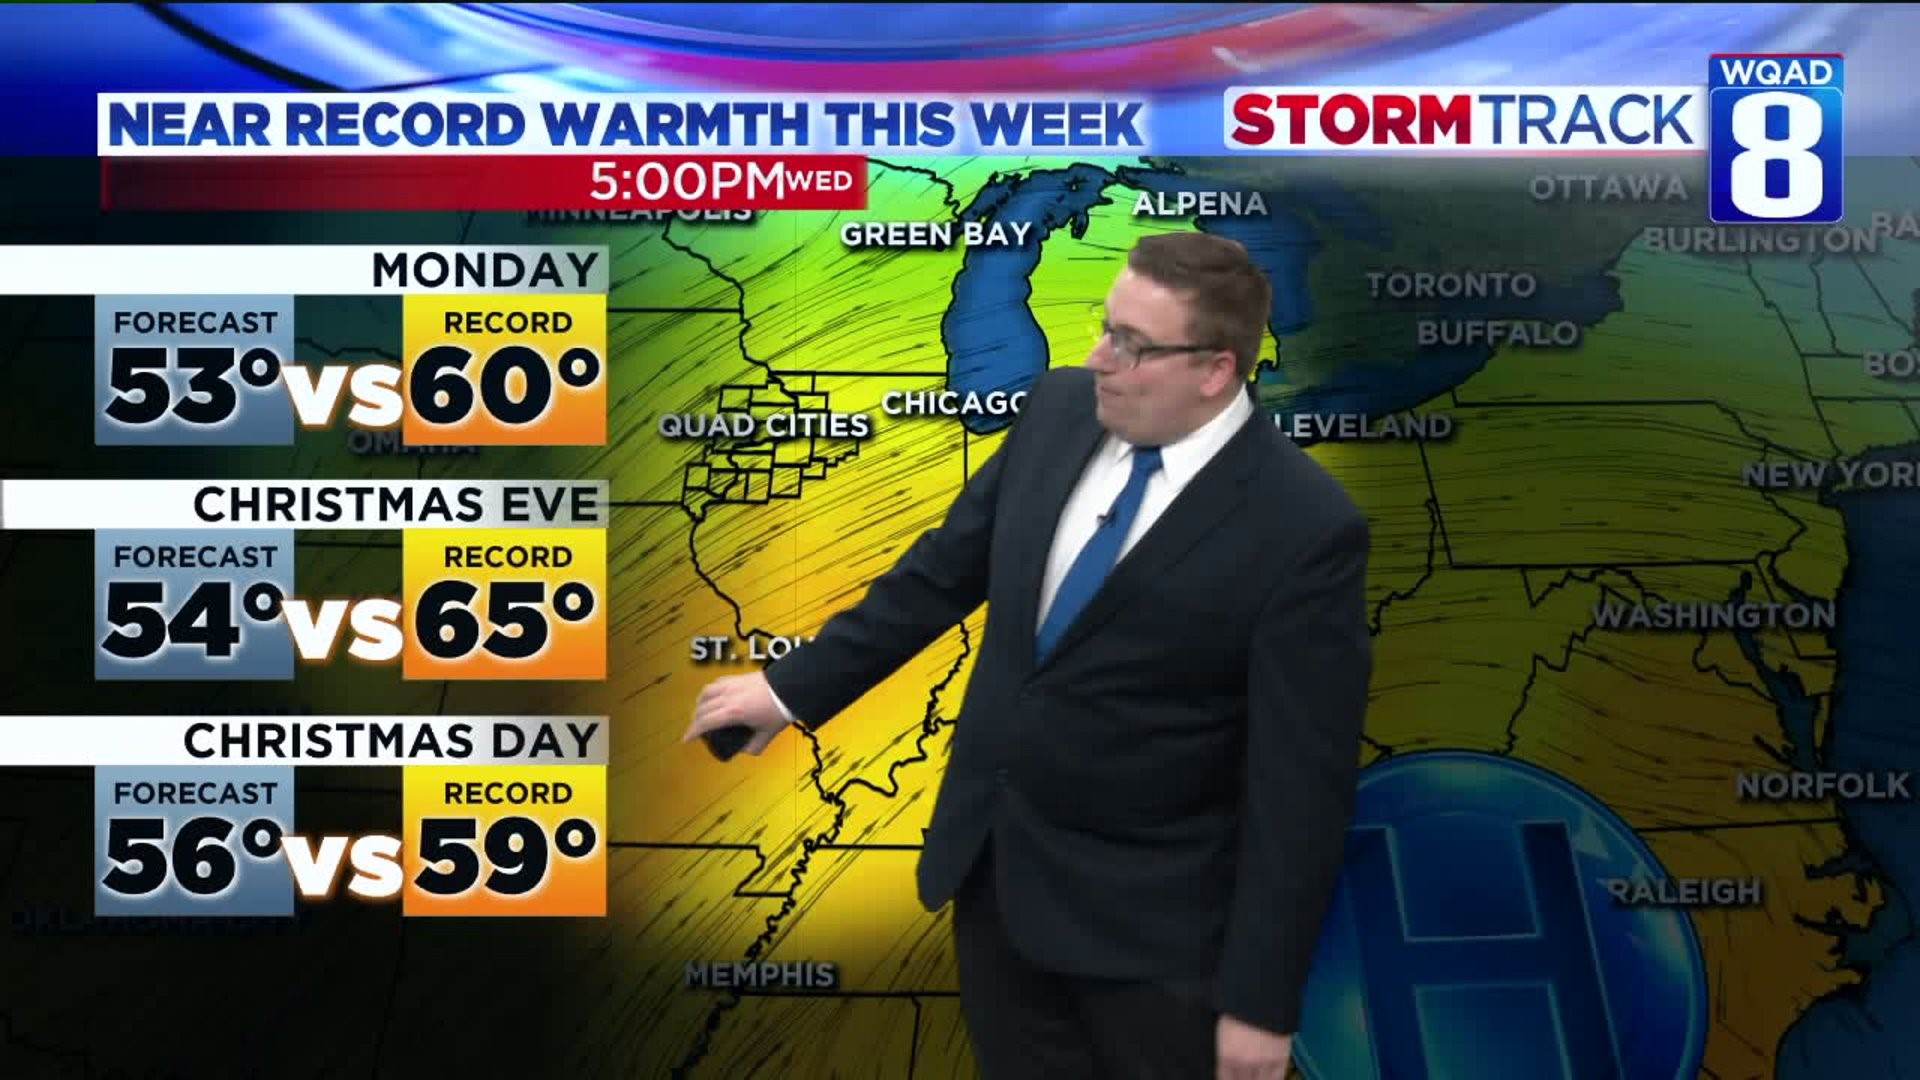 Tracking near record warmth for the week ahead